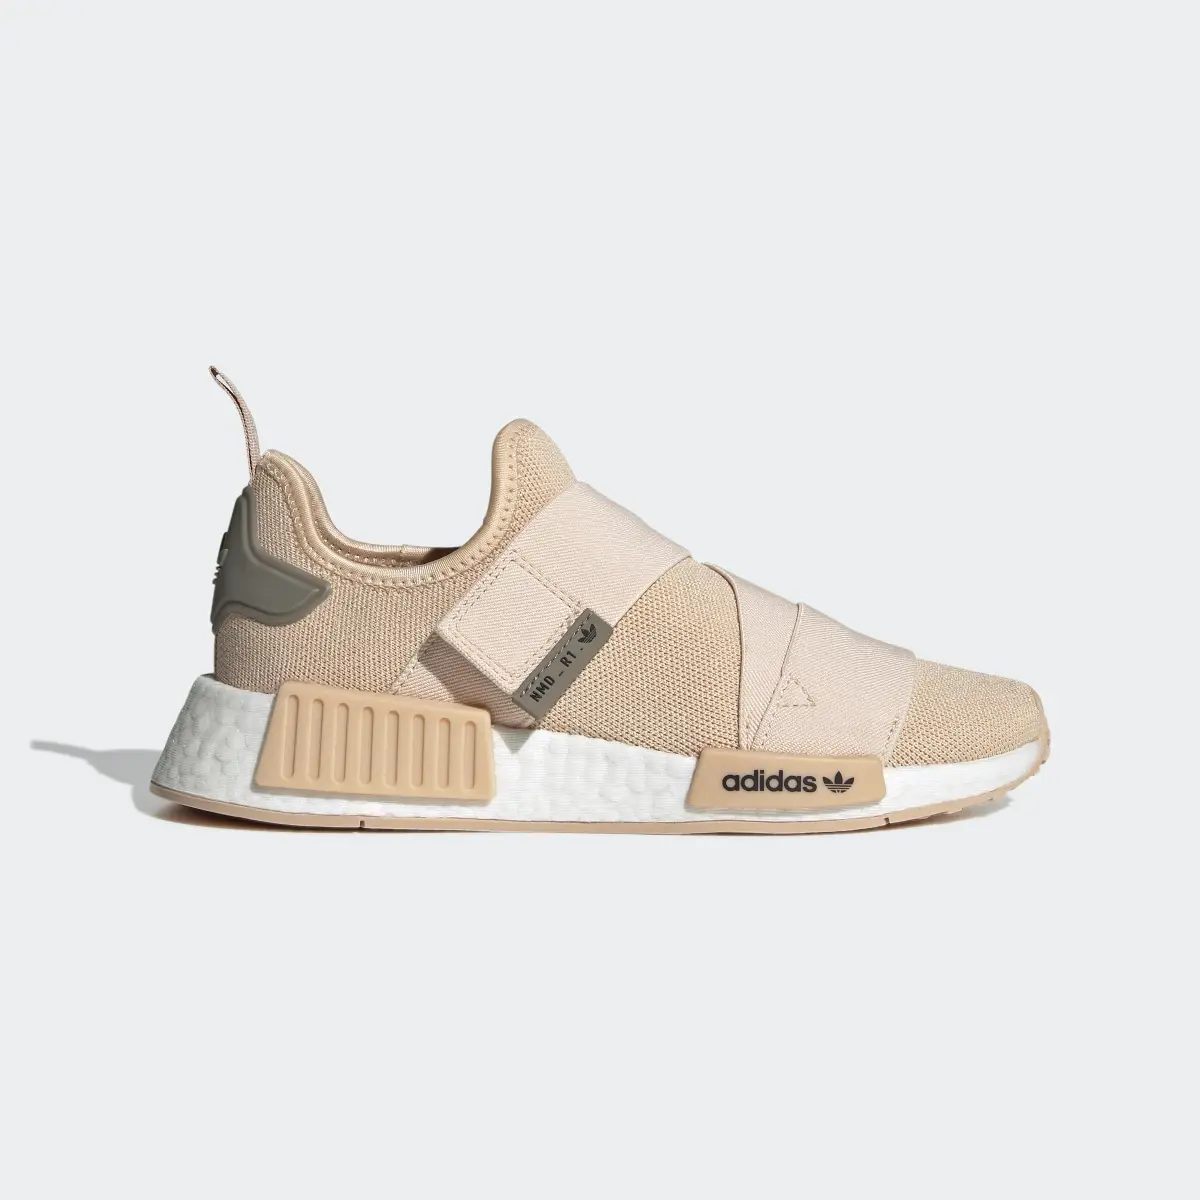 Adidas NMD_R1 Strap Shoes. 2